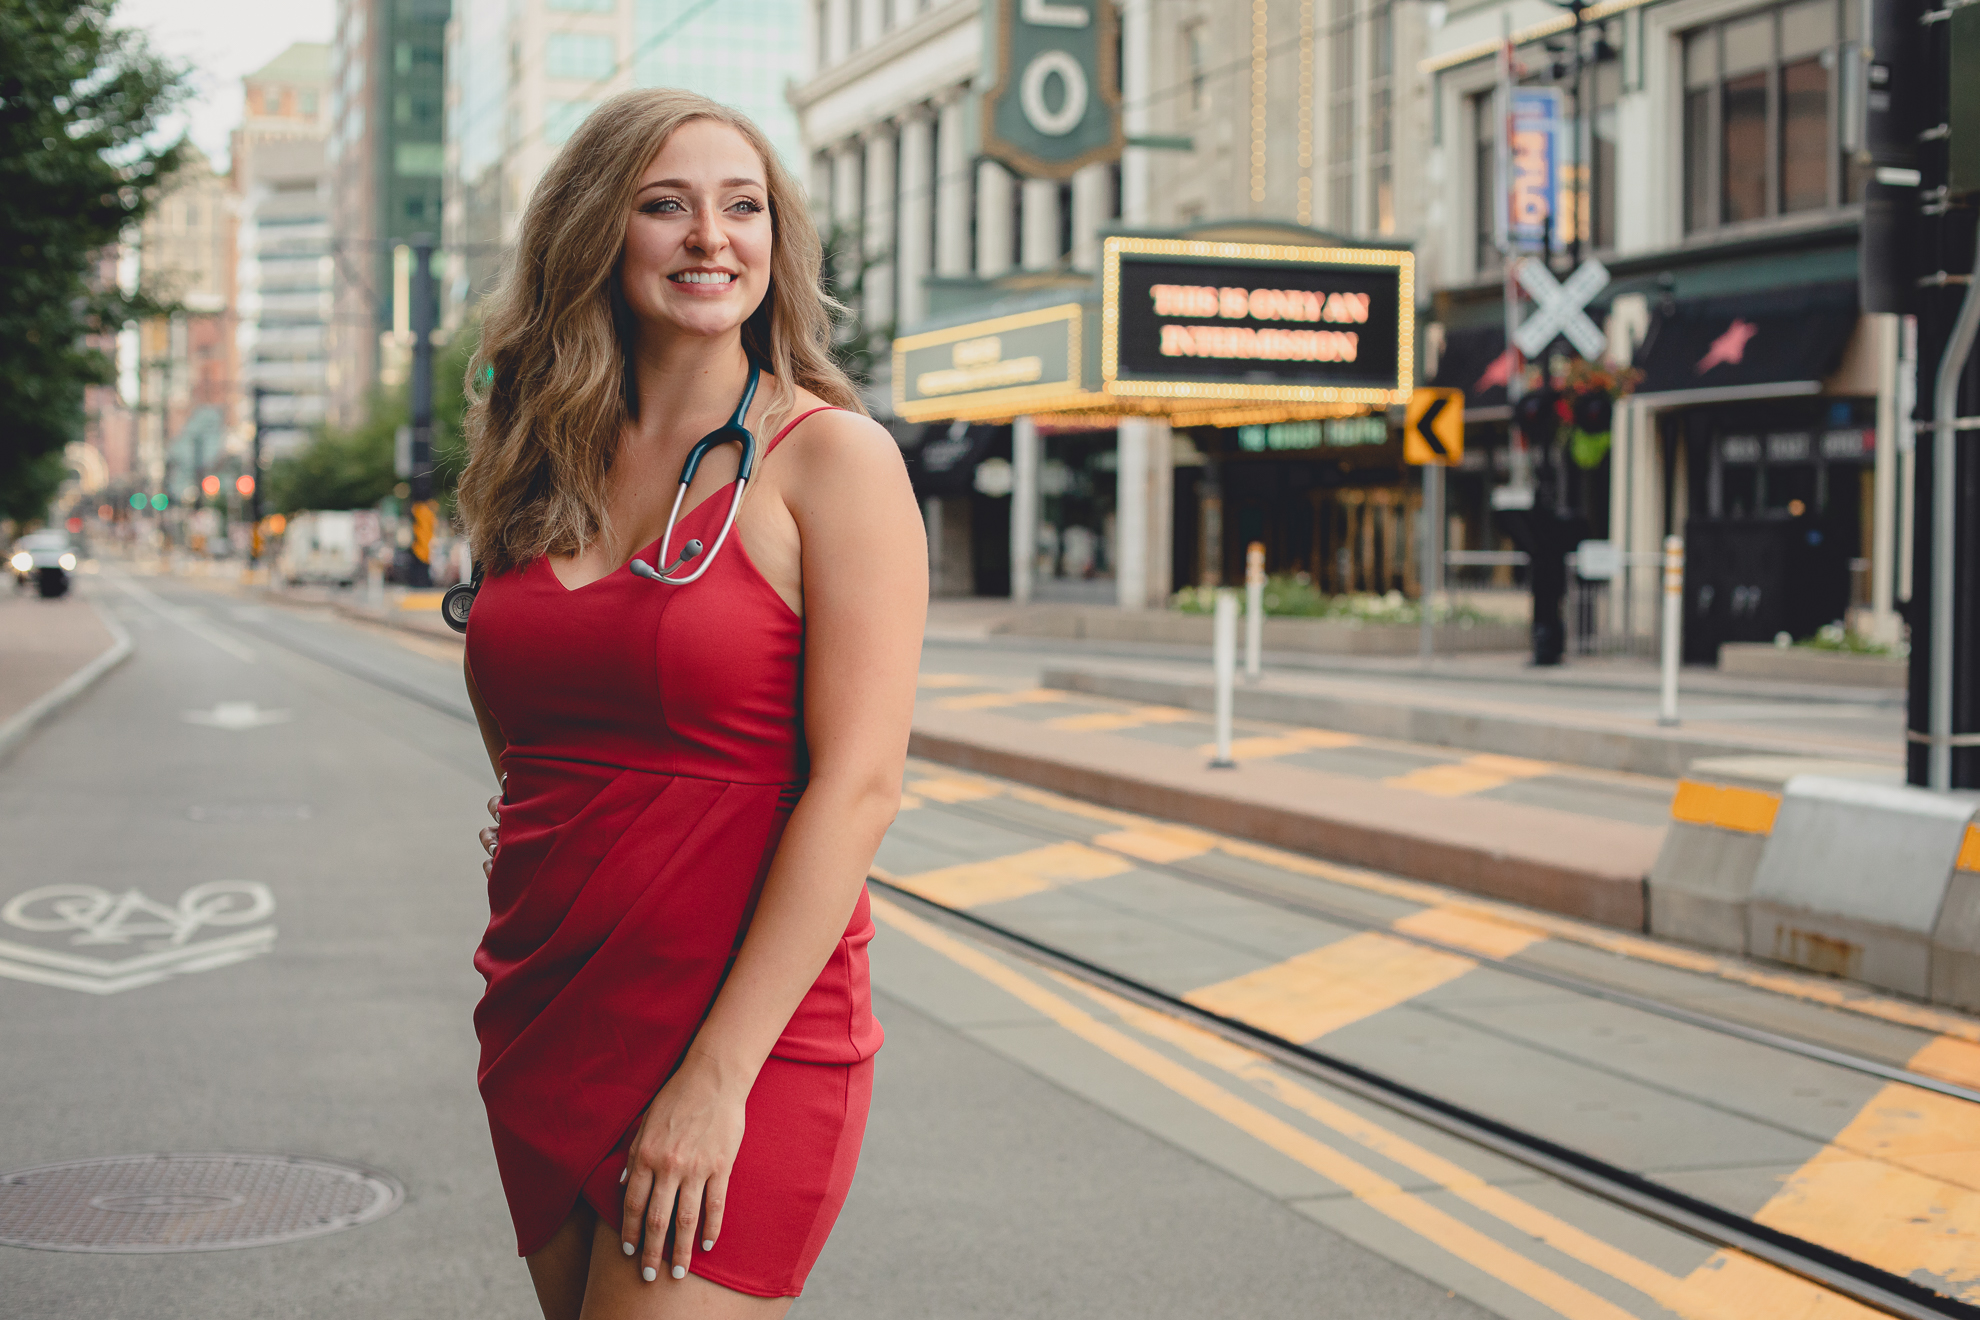 D'youville nursing student smiles for photographer in front of Shea's Theater during senior graduation portrait photography session in Buffalo, NY